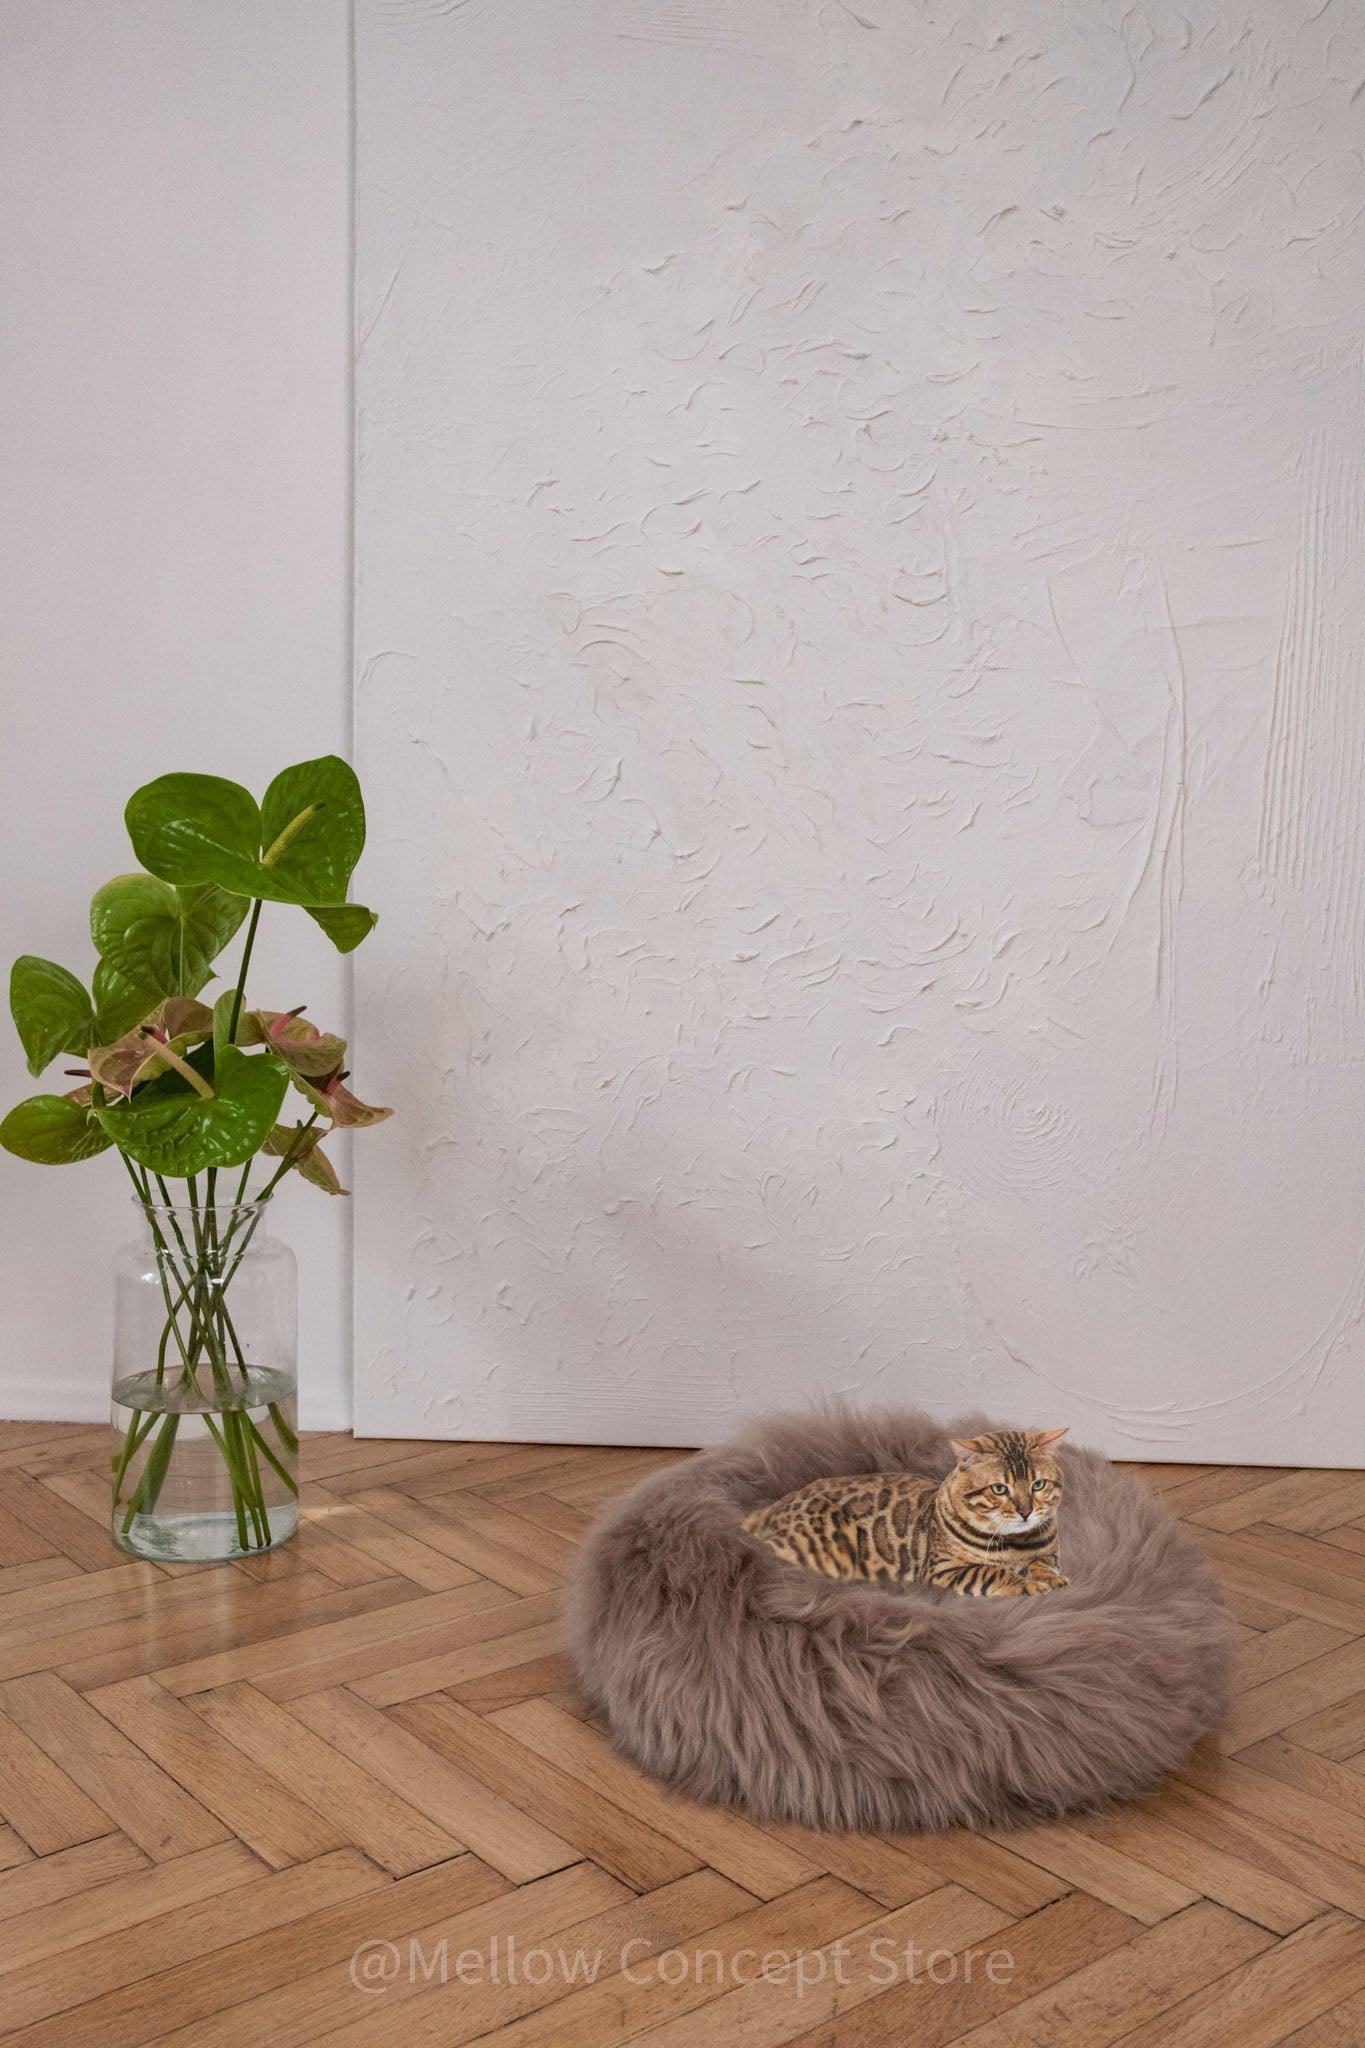 A cat resting on a Round Natural Sheepskin Pet Bed in a room with a vase.